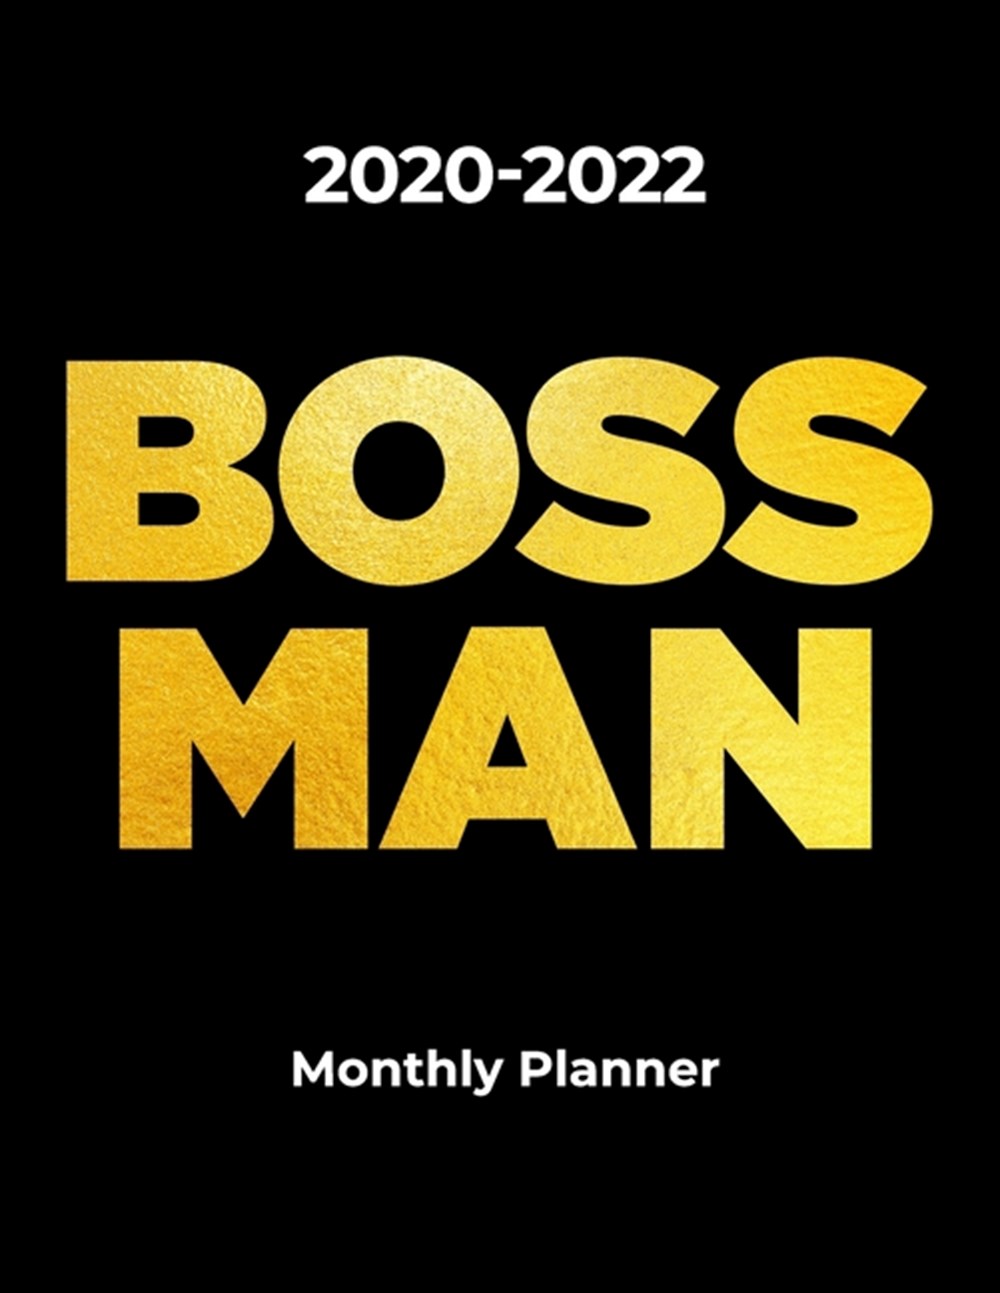 2020-2022 BOSS MAN Monthly Planner for Entrepreneurs and Business Men Three Year Schedule Organizer 